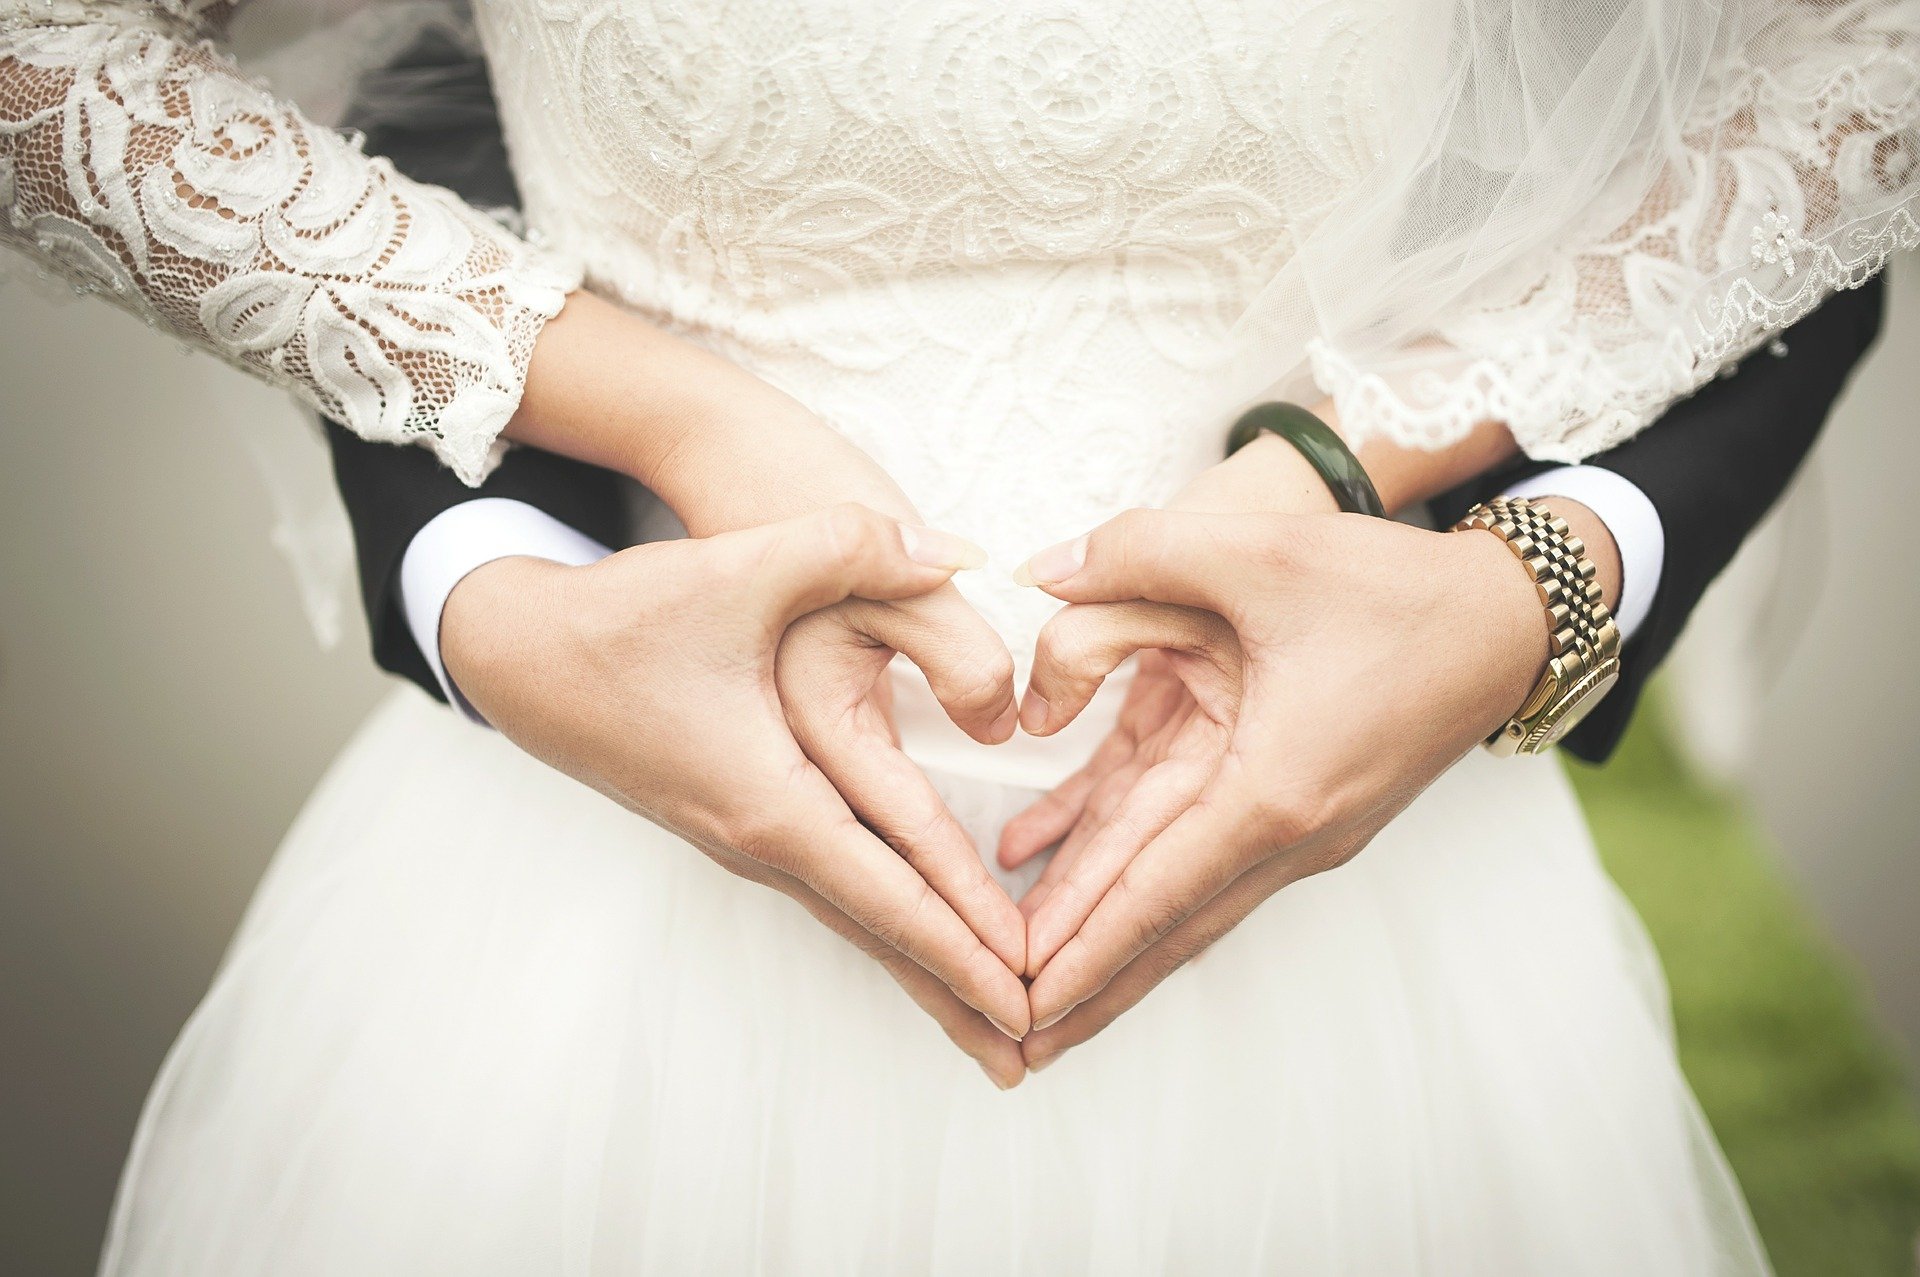 What makes an absolutely incredible wedding celebrant?